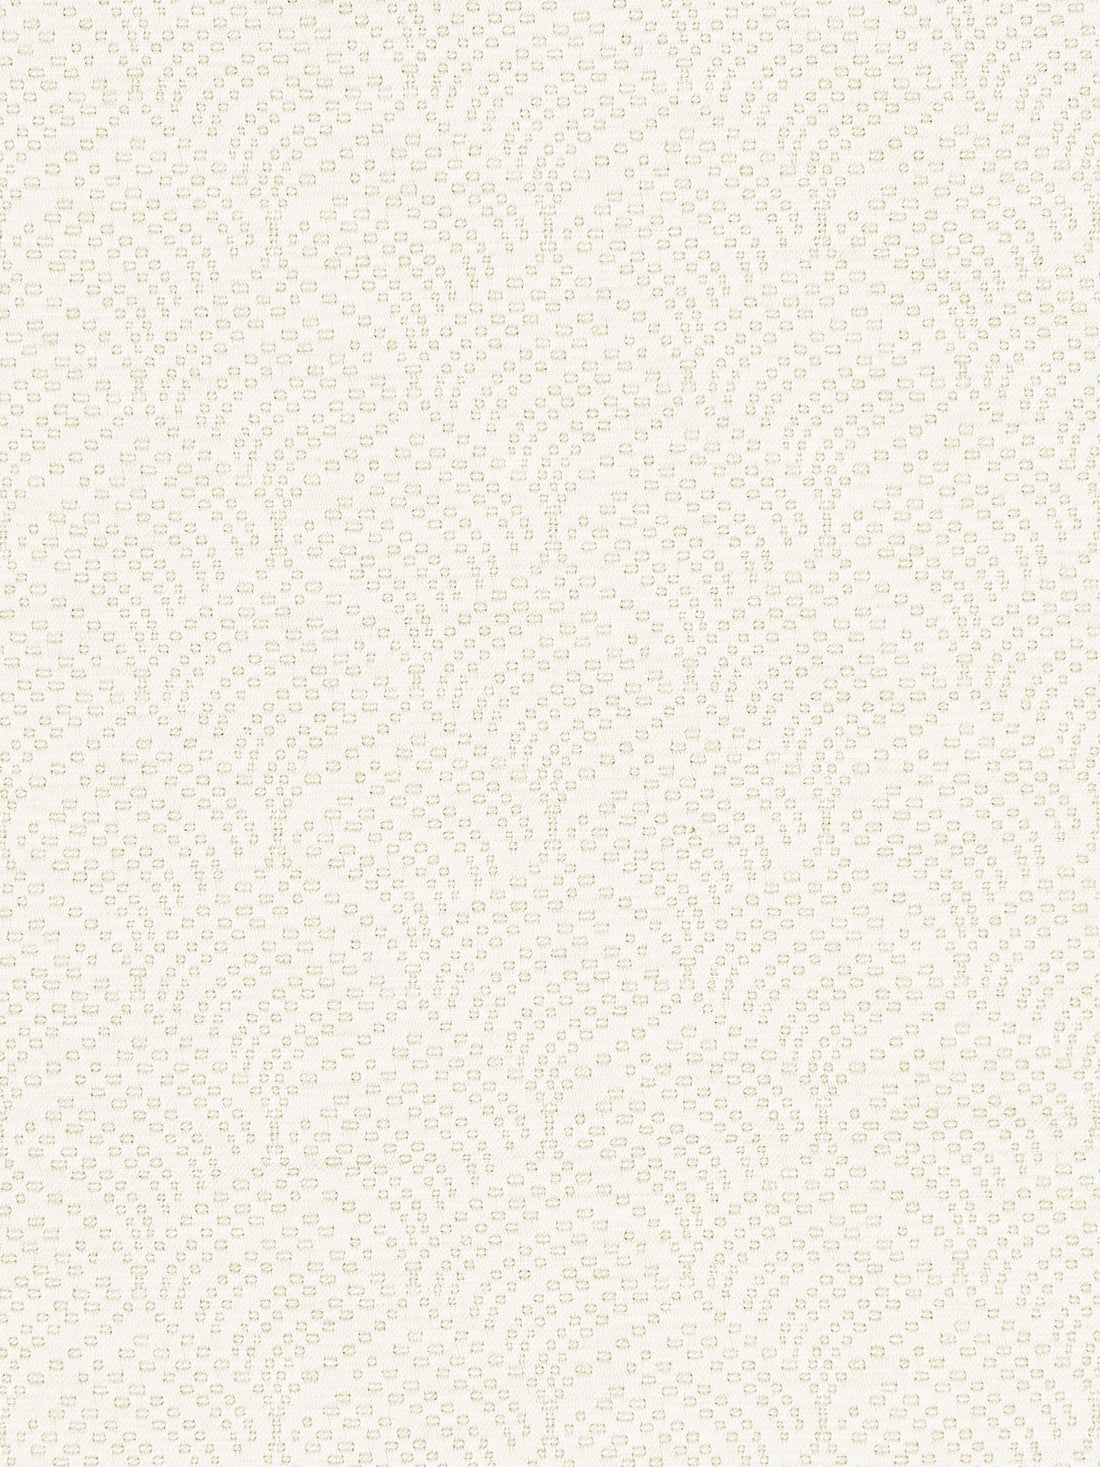 Playa Grande fabric in sand color - pattern number SU 00023616 - by Scalamandre in the Old World Weavers collection